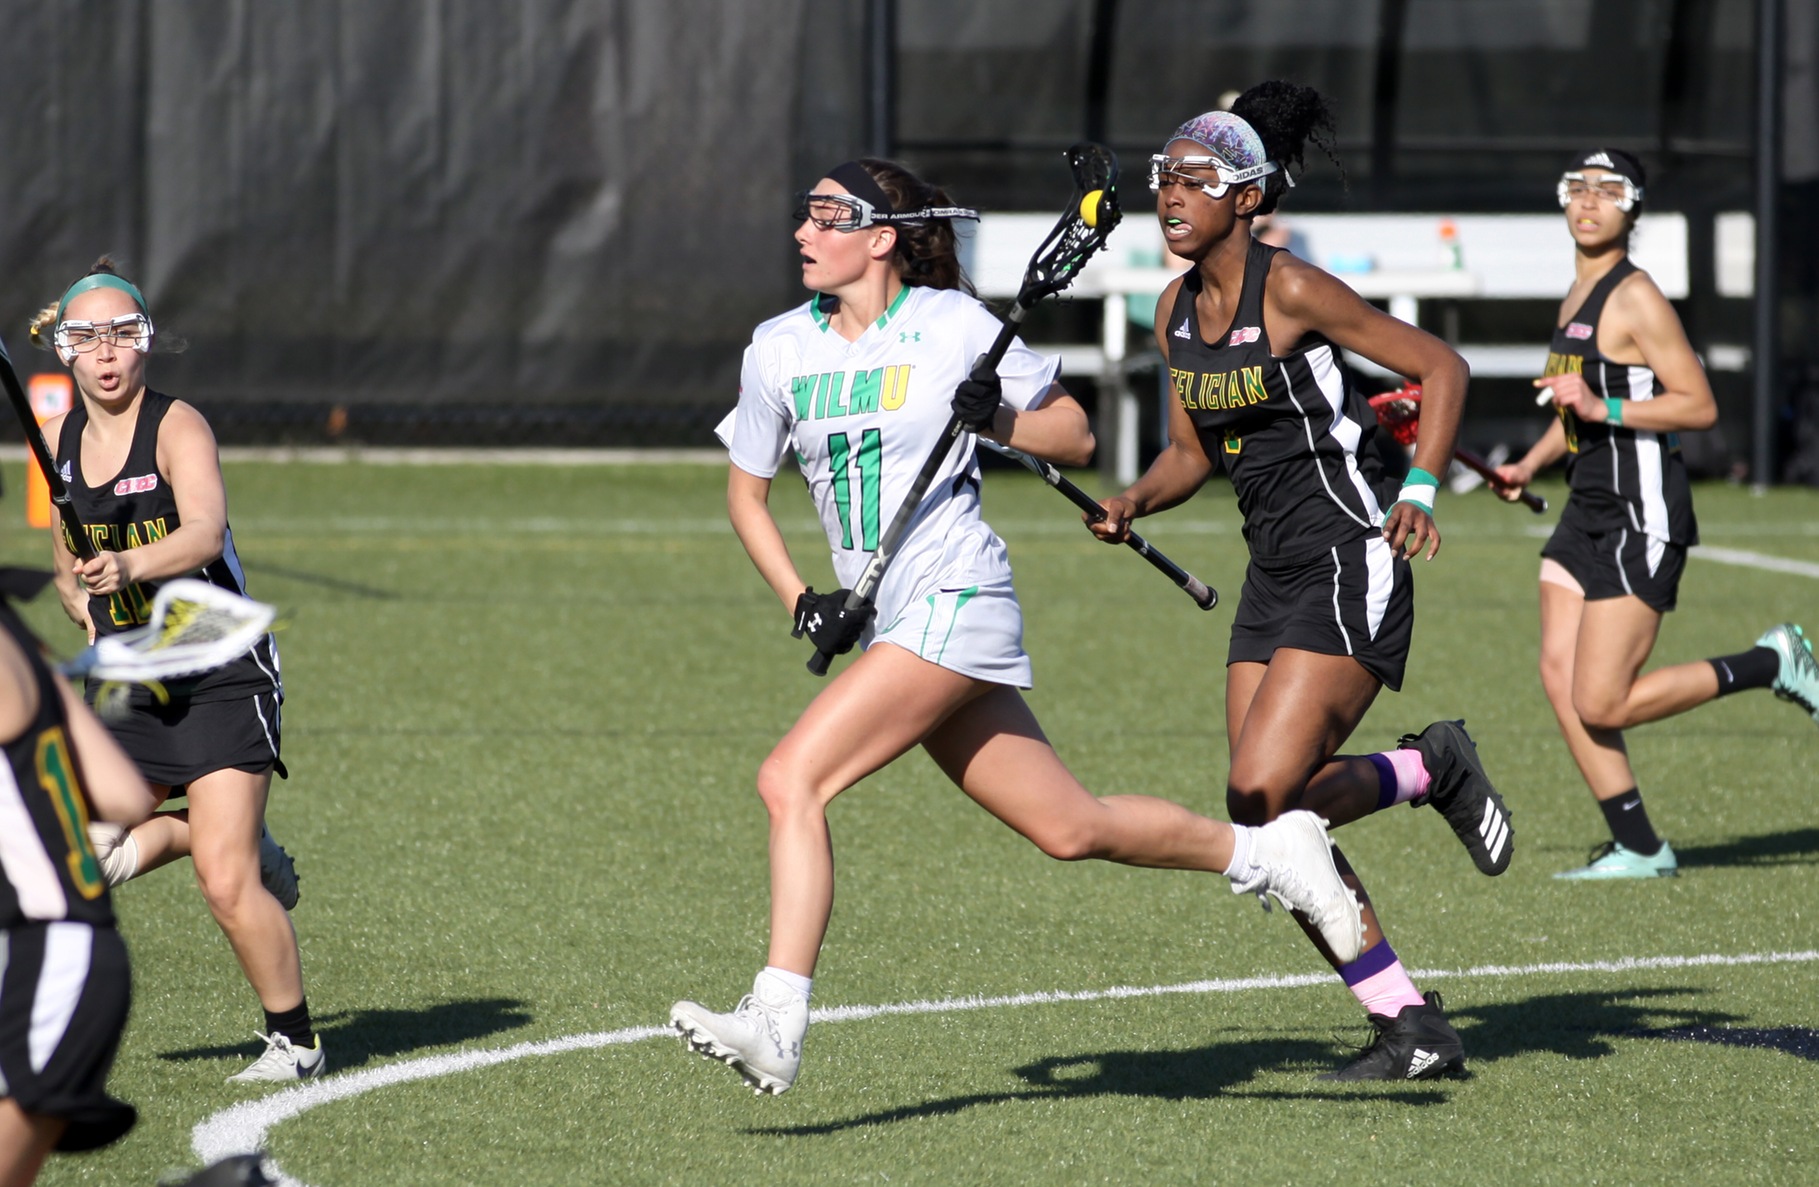 Copyright 2019; Wilmington University. All rights reserved. Photo of Delaney Steele who led the Wildcats with 4 goals and six assists for 10 points against Felician. Photo by Katlynne Tubo. April 3, 2019 vs. Felician